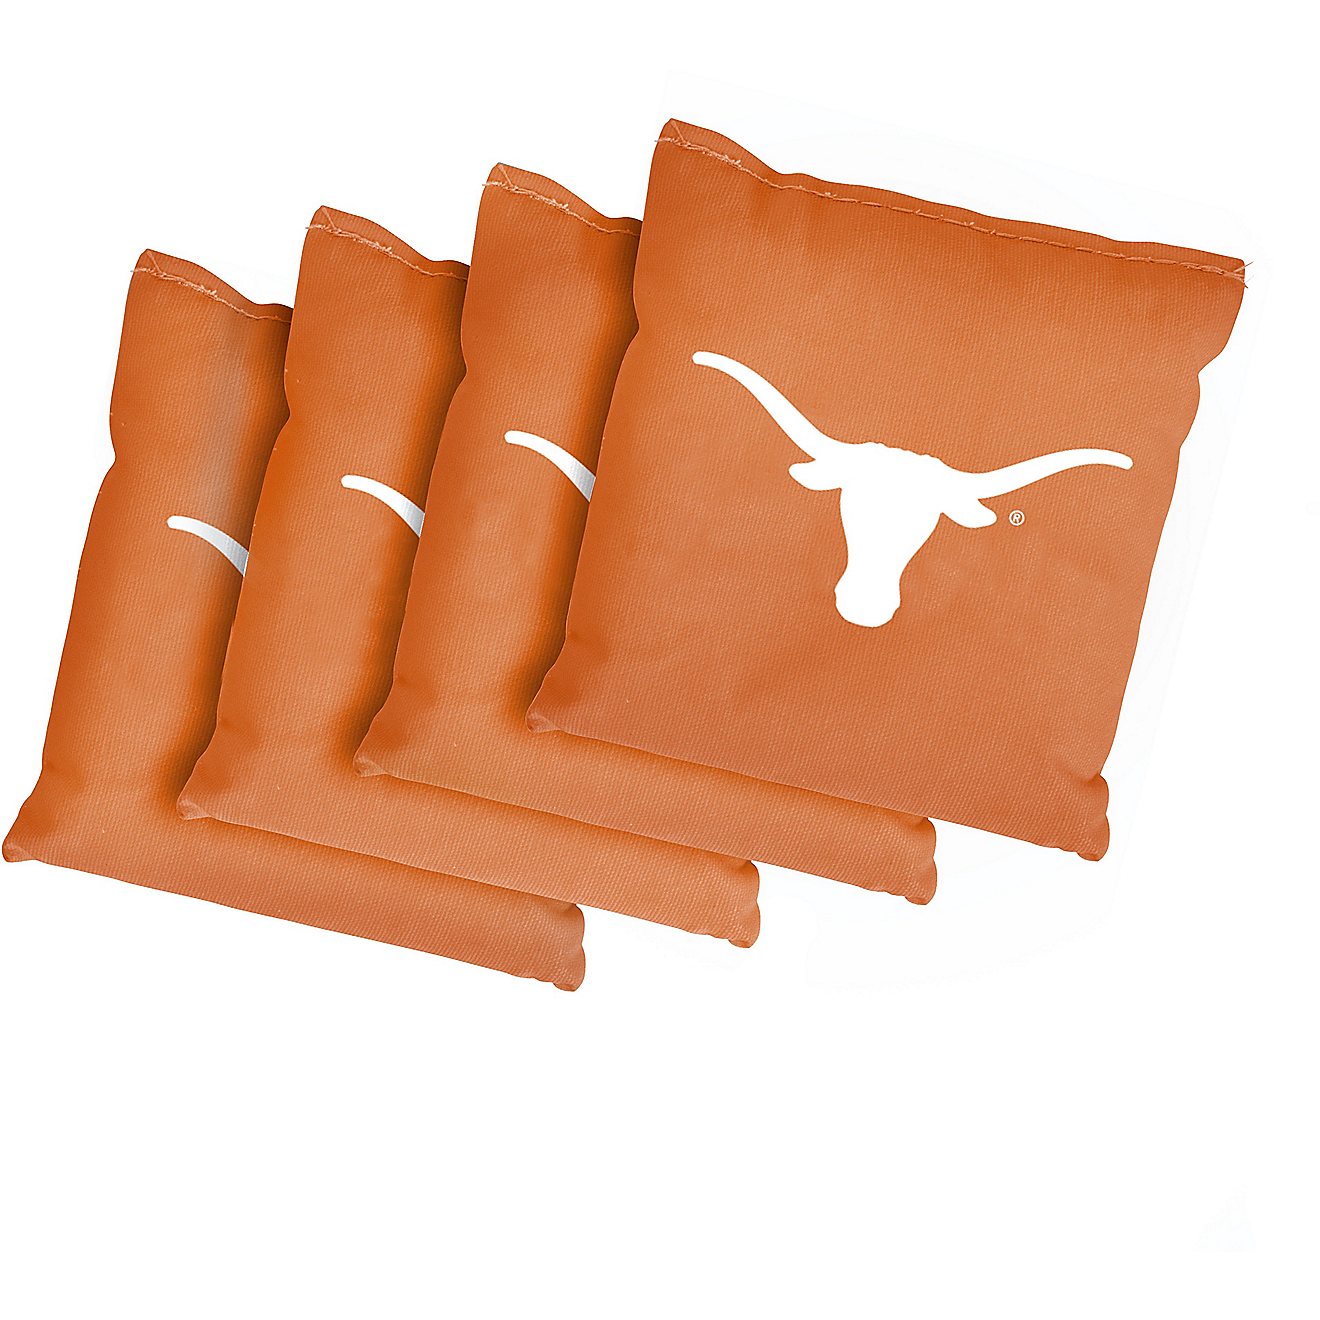 NCAA University of Texas Cornhole Replacement Bean Bags 4-Pack                                                                   - view number 1